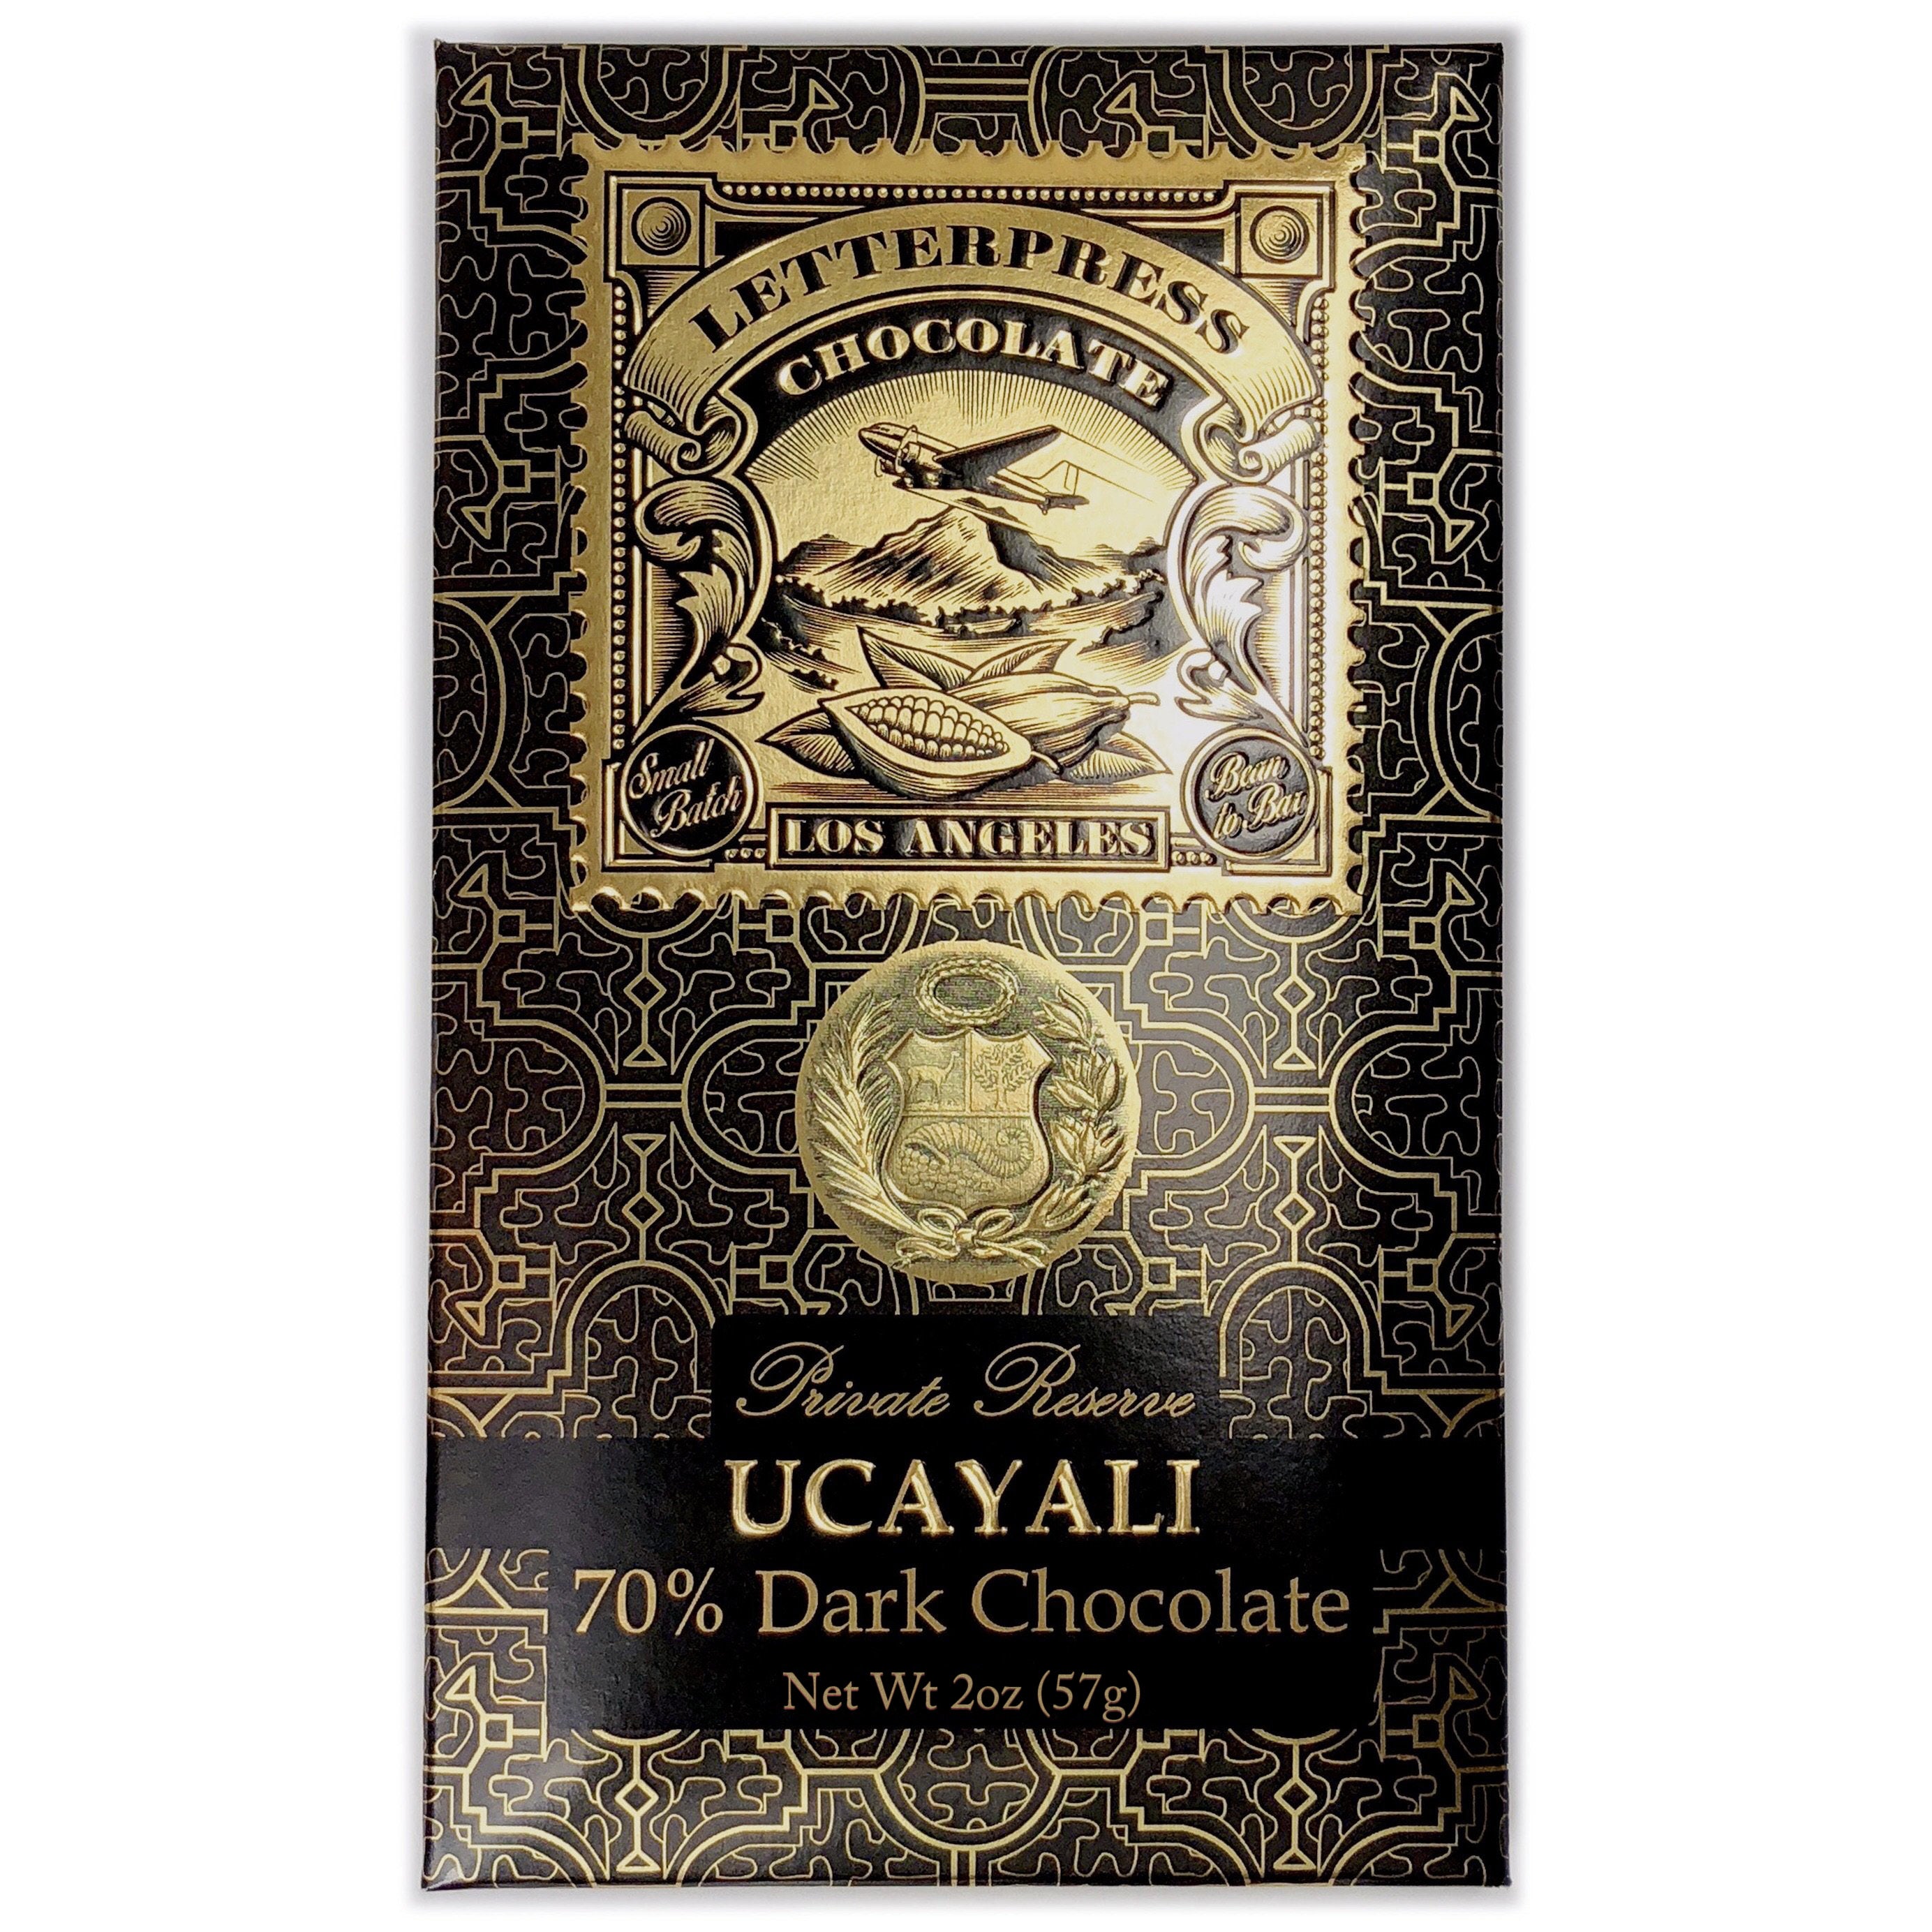 Ucayali Private Reserve 70% Dark Chocolate packaging on a white background